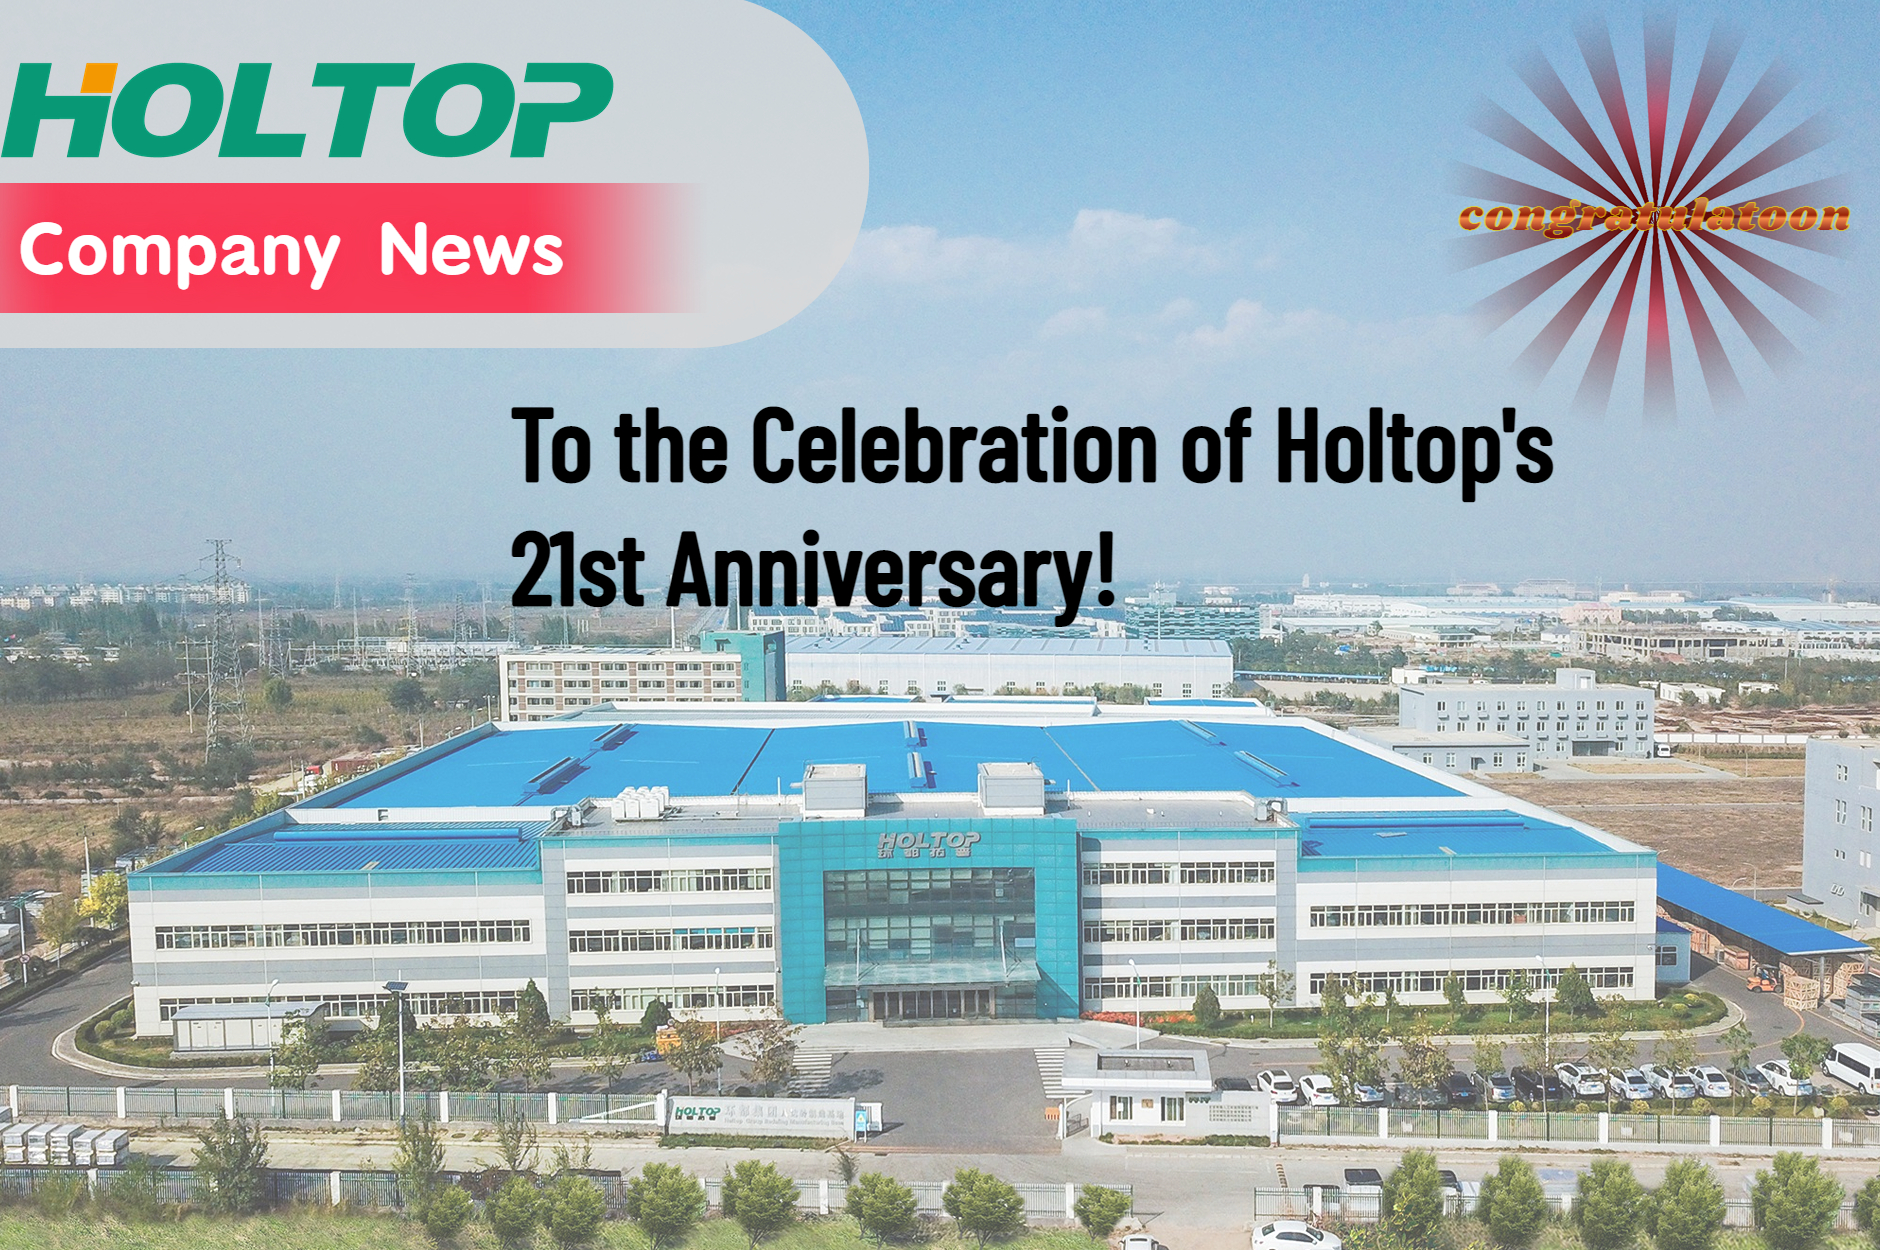 To the Celebration of Holtop’s 21st Anniversary!